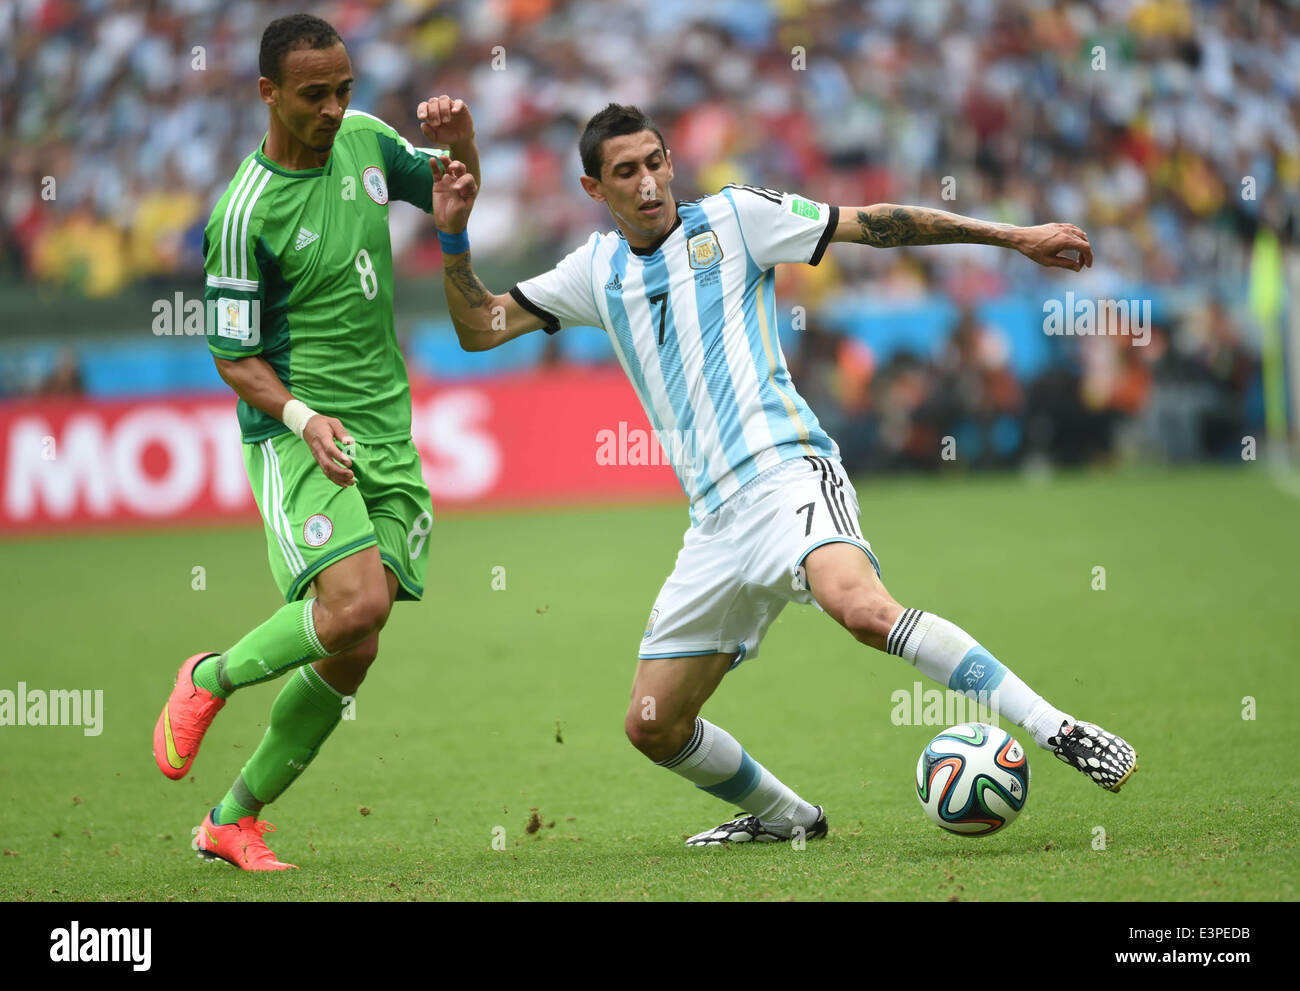 Porto Alegre, Brazil. 25th June, 2014. Argentina's Angel Di Maria (R) vies with Nigeria's Peter Osaze Odemwingie during a Group F match between Nigeria and Argentina of 2014 FIFA World Cup at the Estadio Beira-Rio Stadium in Porto Alegre, Brazil, on June 25, 2014. © Li Ga/Xinhua/Alamy Live News Stock Photo